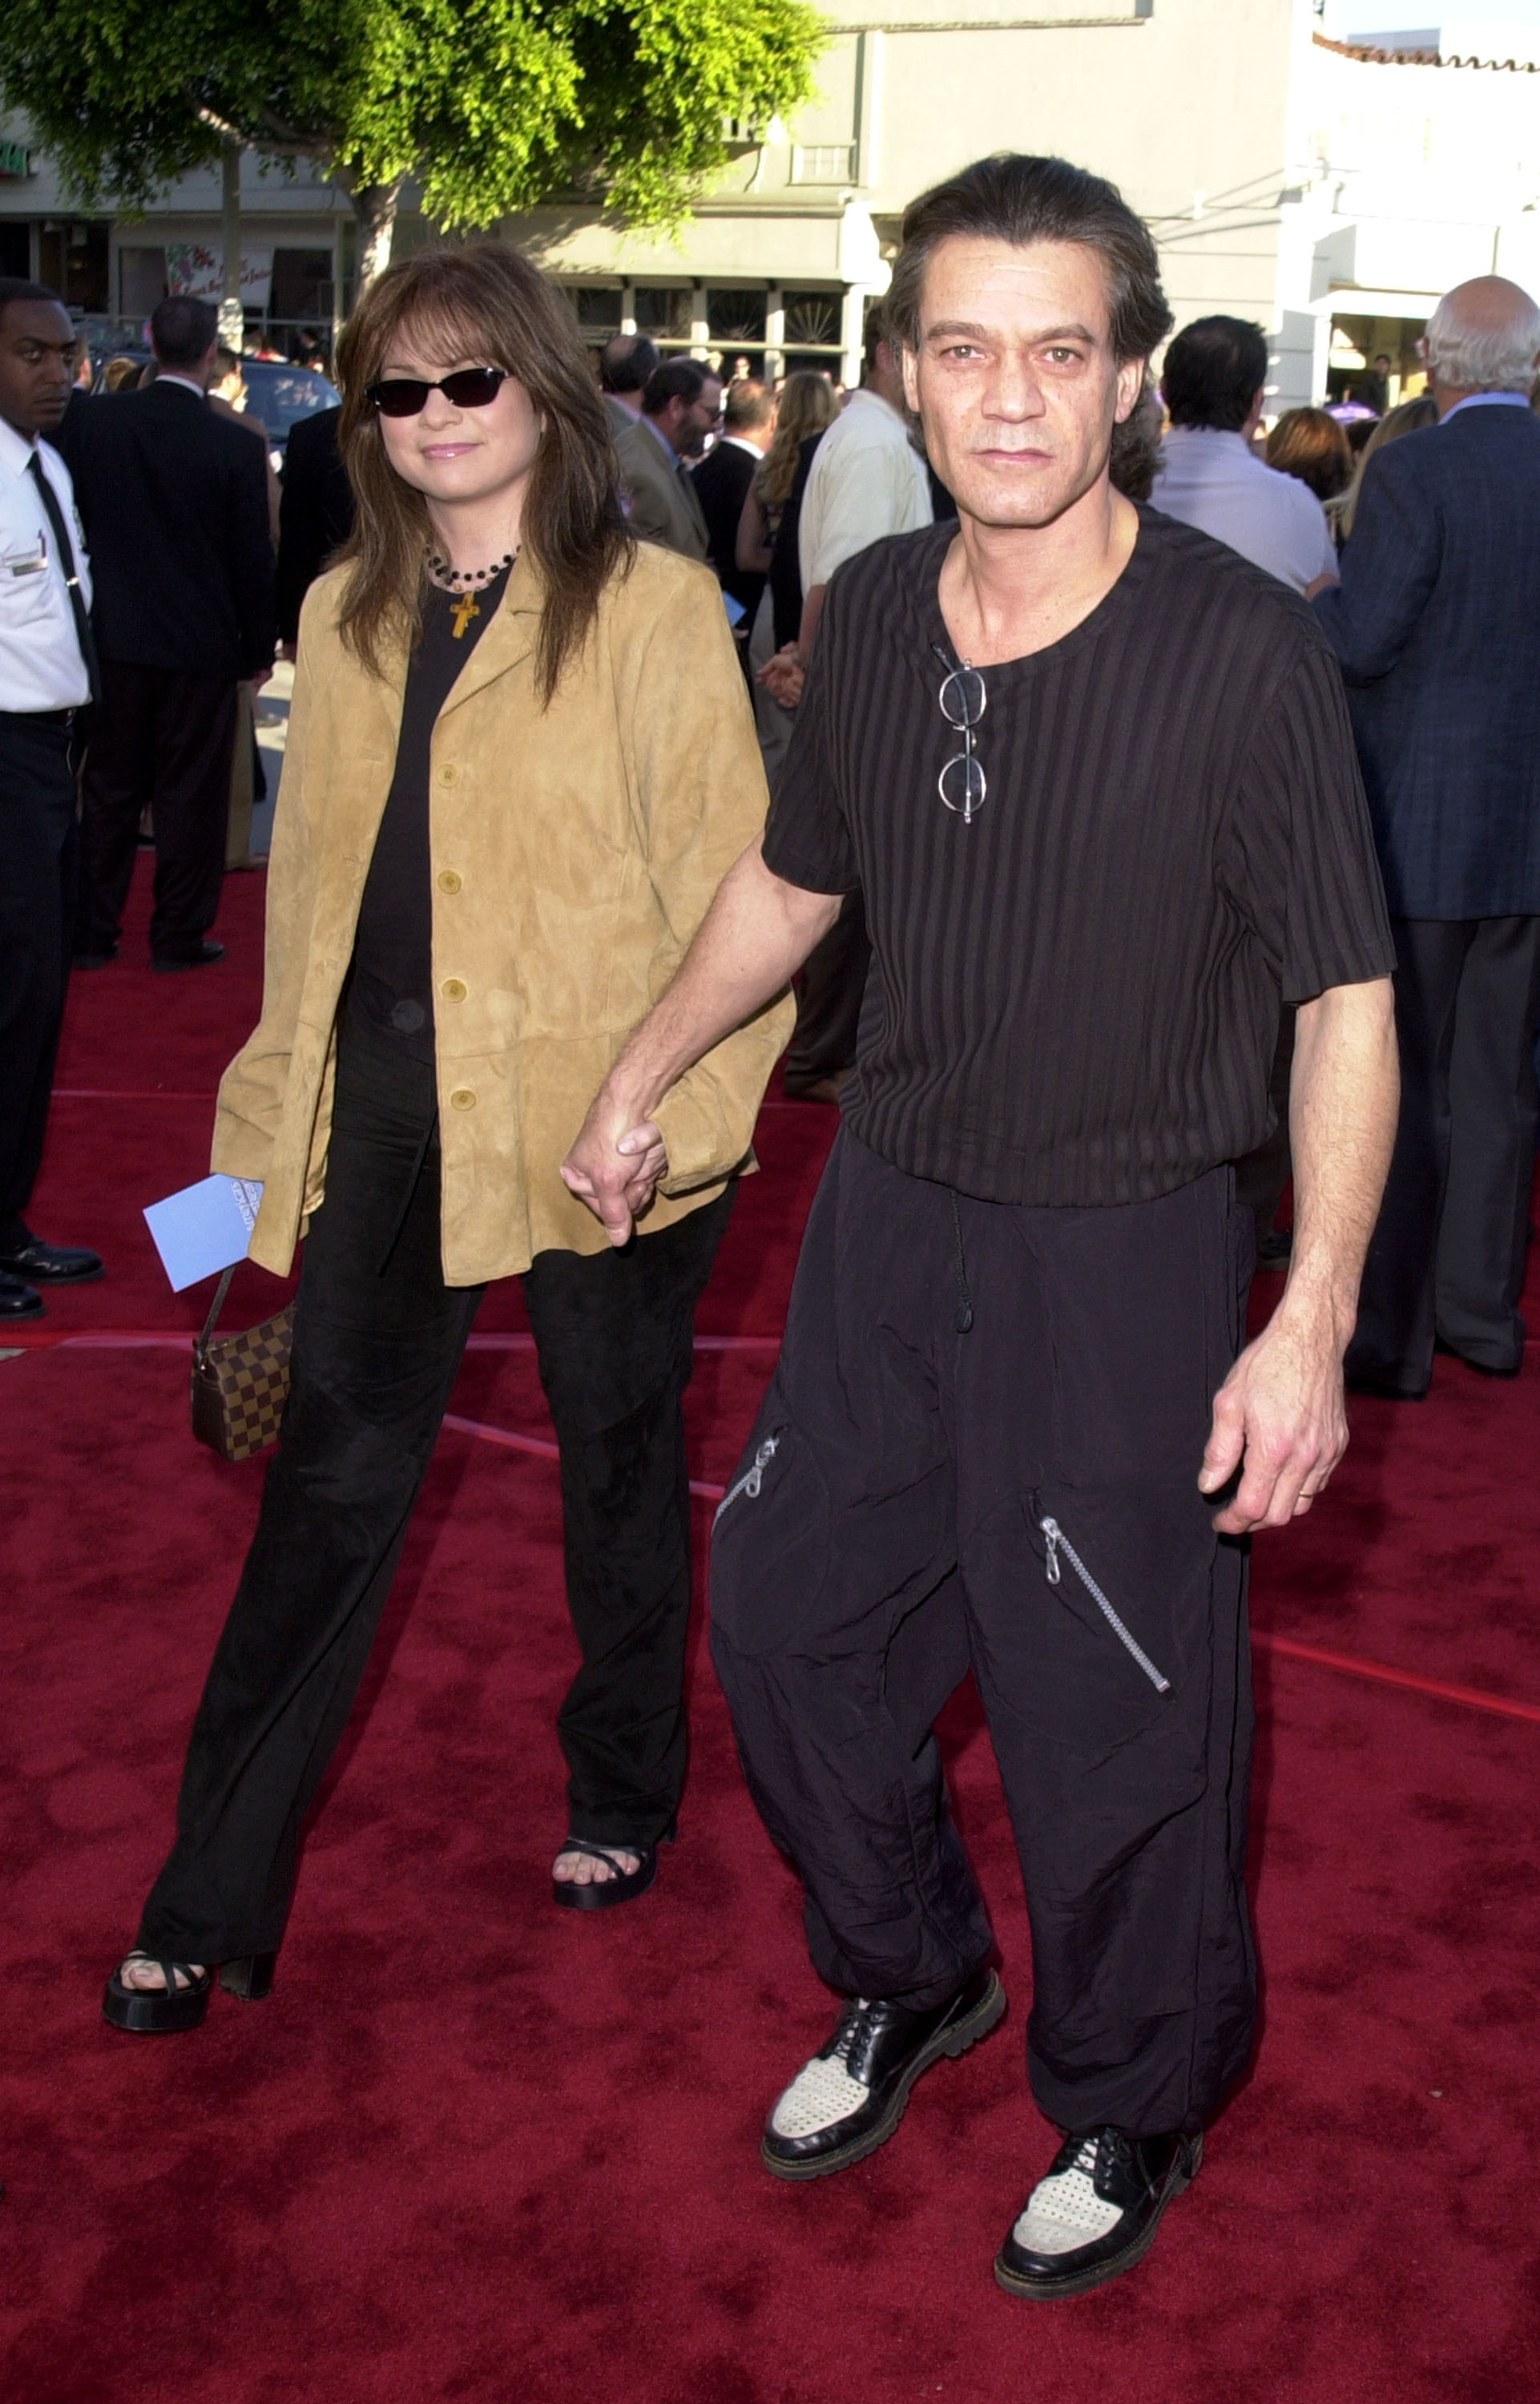 Eddie Van Halen and Valerie Bertinelli at the premiere of "America's Sweethearts" in Los Angeles, California in 2001. | Source: Getty Images